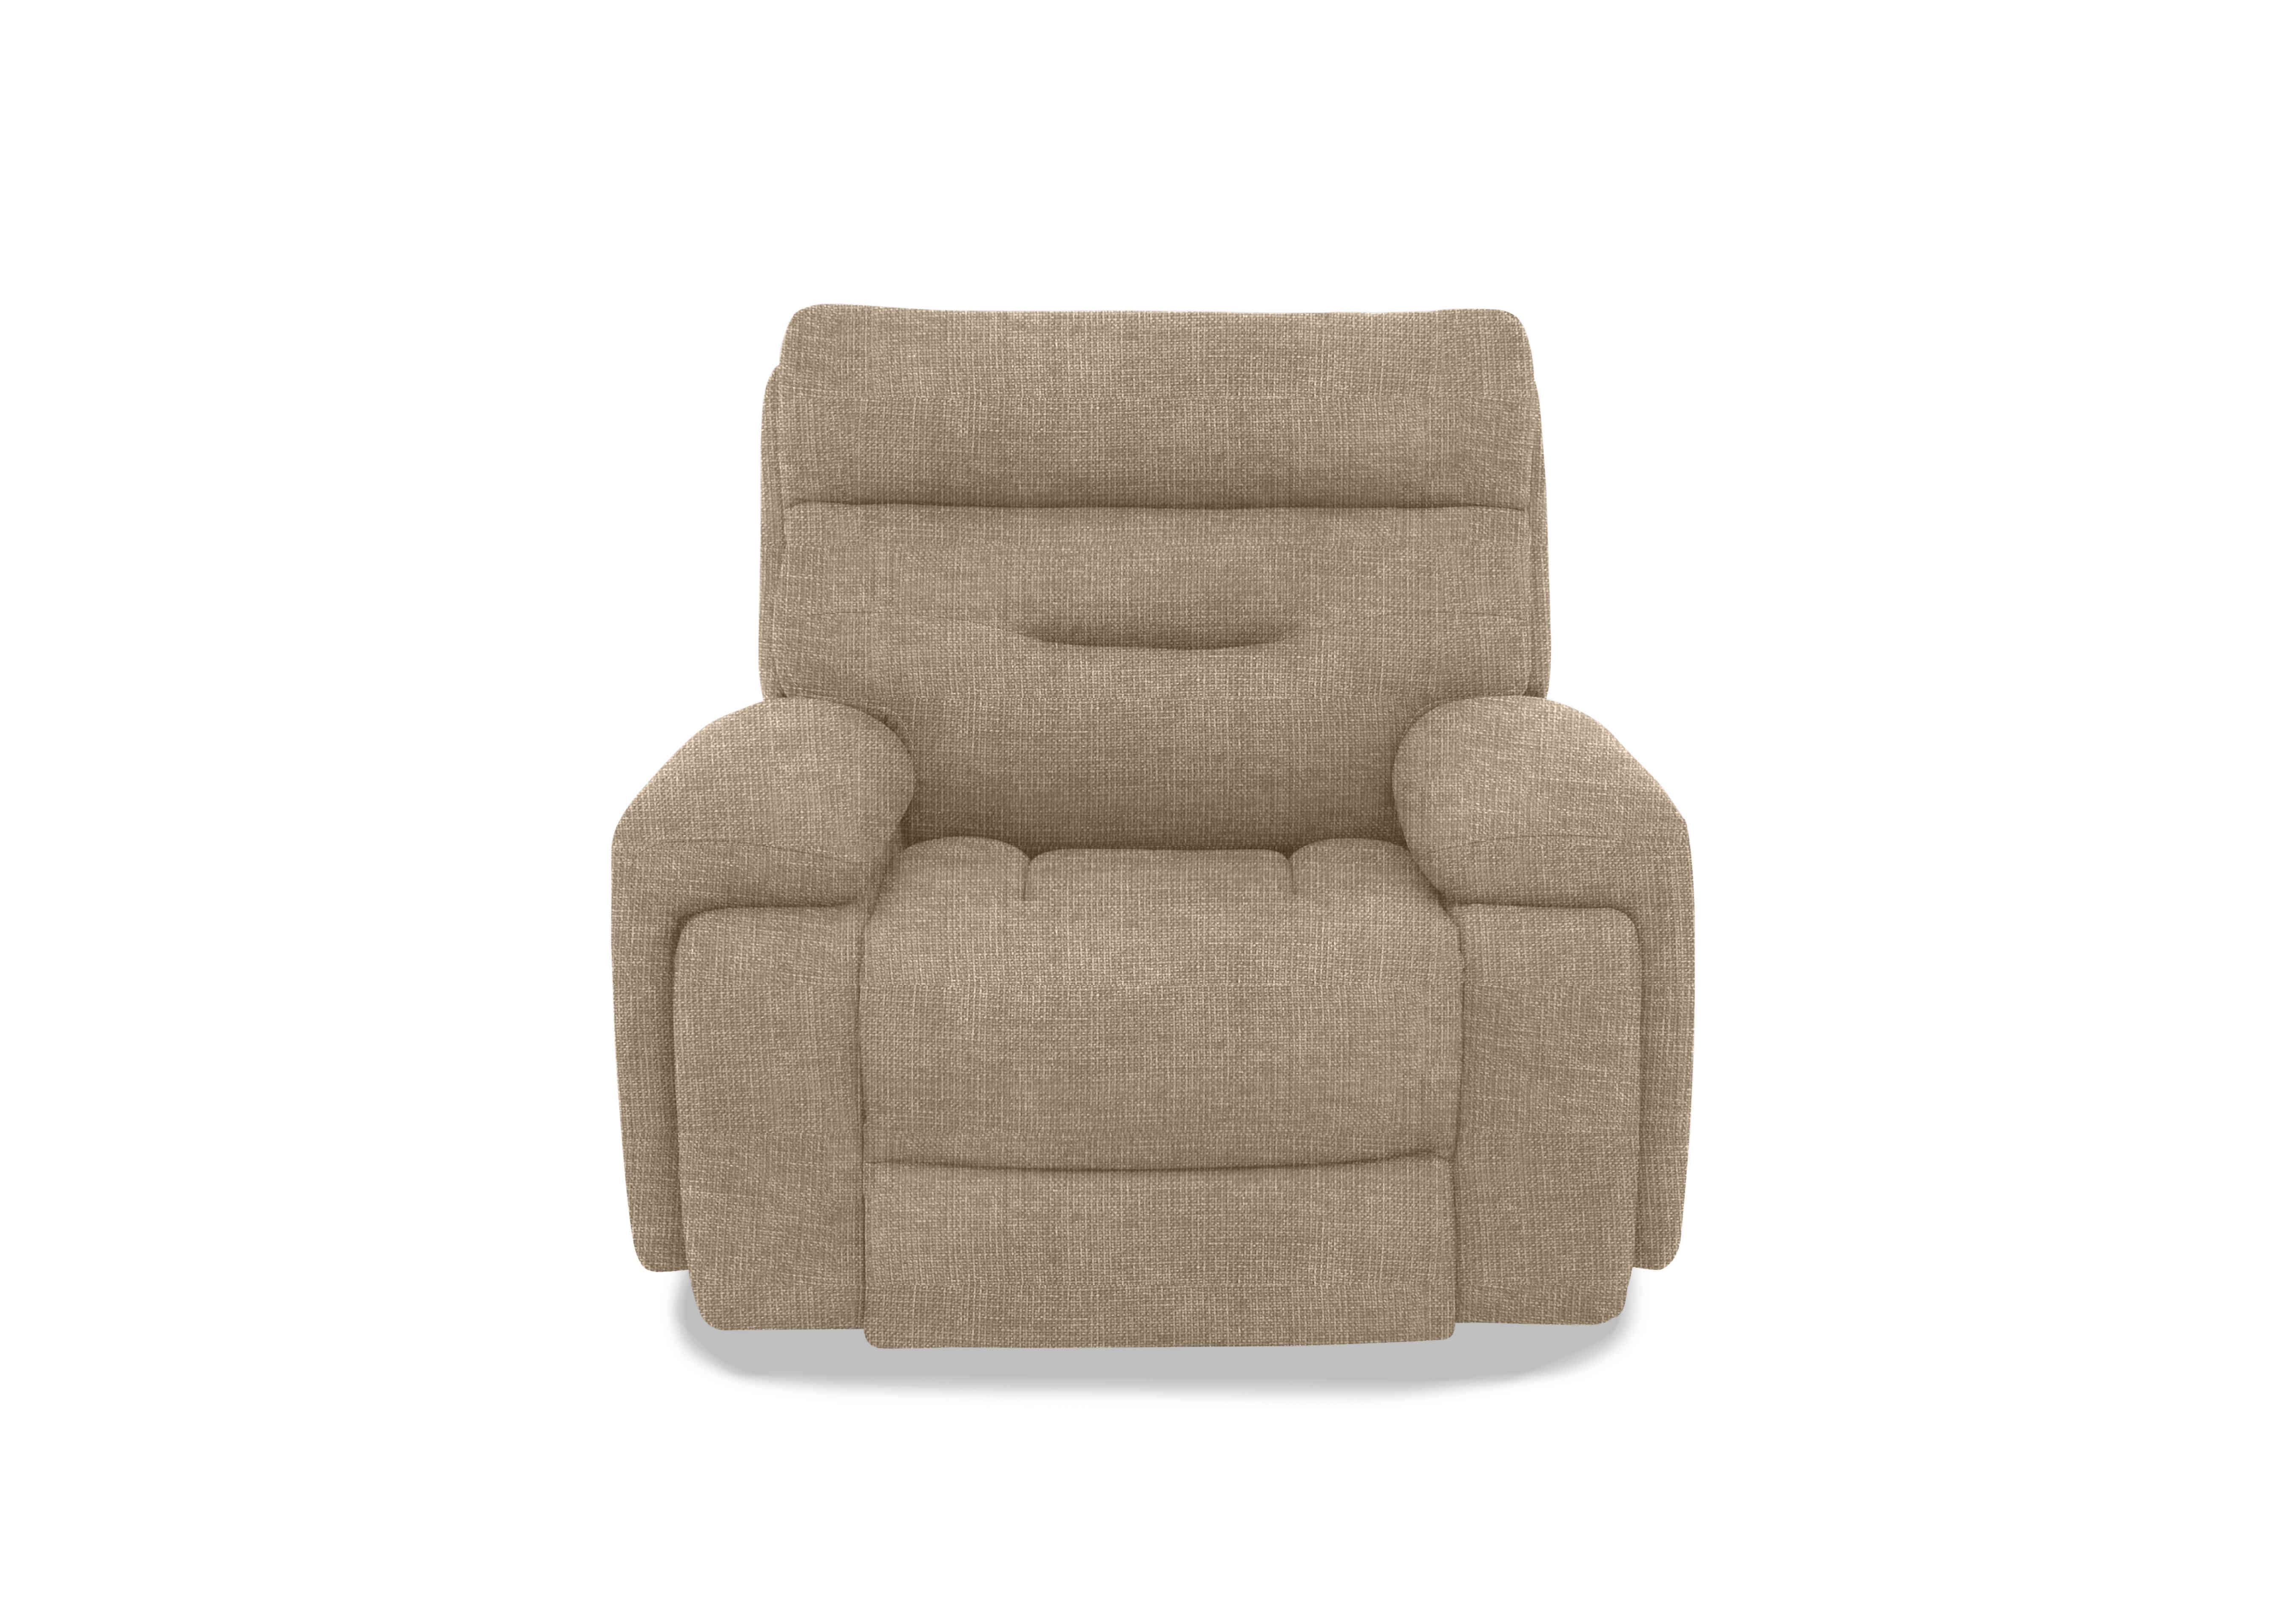 Cinemax Media Fabric Power Recliner Chair with Power Headrest in We-0103 Weave Cocoa on Furniture Village